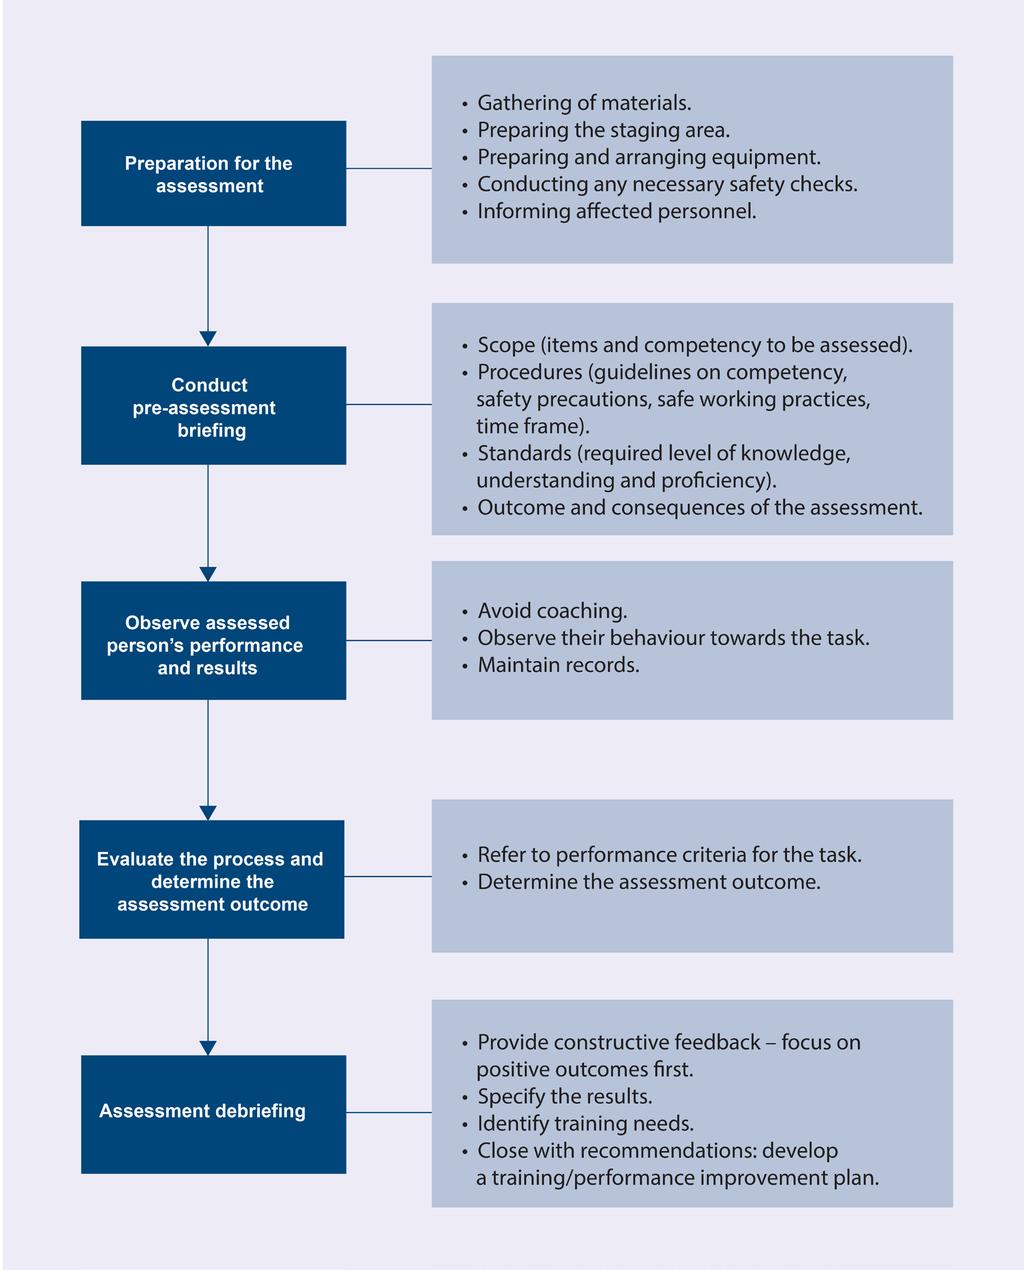 5.5 Outline of the assessment process The key steps for conducting an onboard assessment are shown in the flowchart below. Please refer to the IMO model course 1.